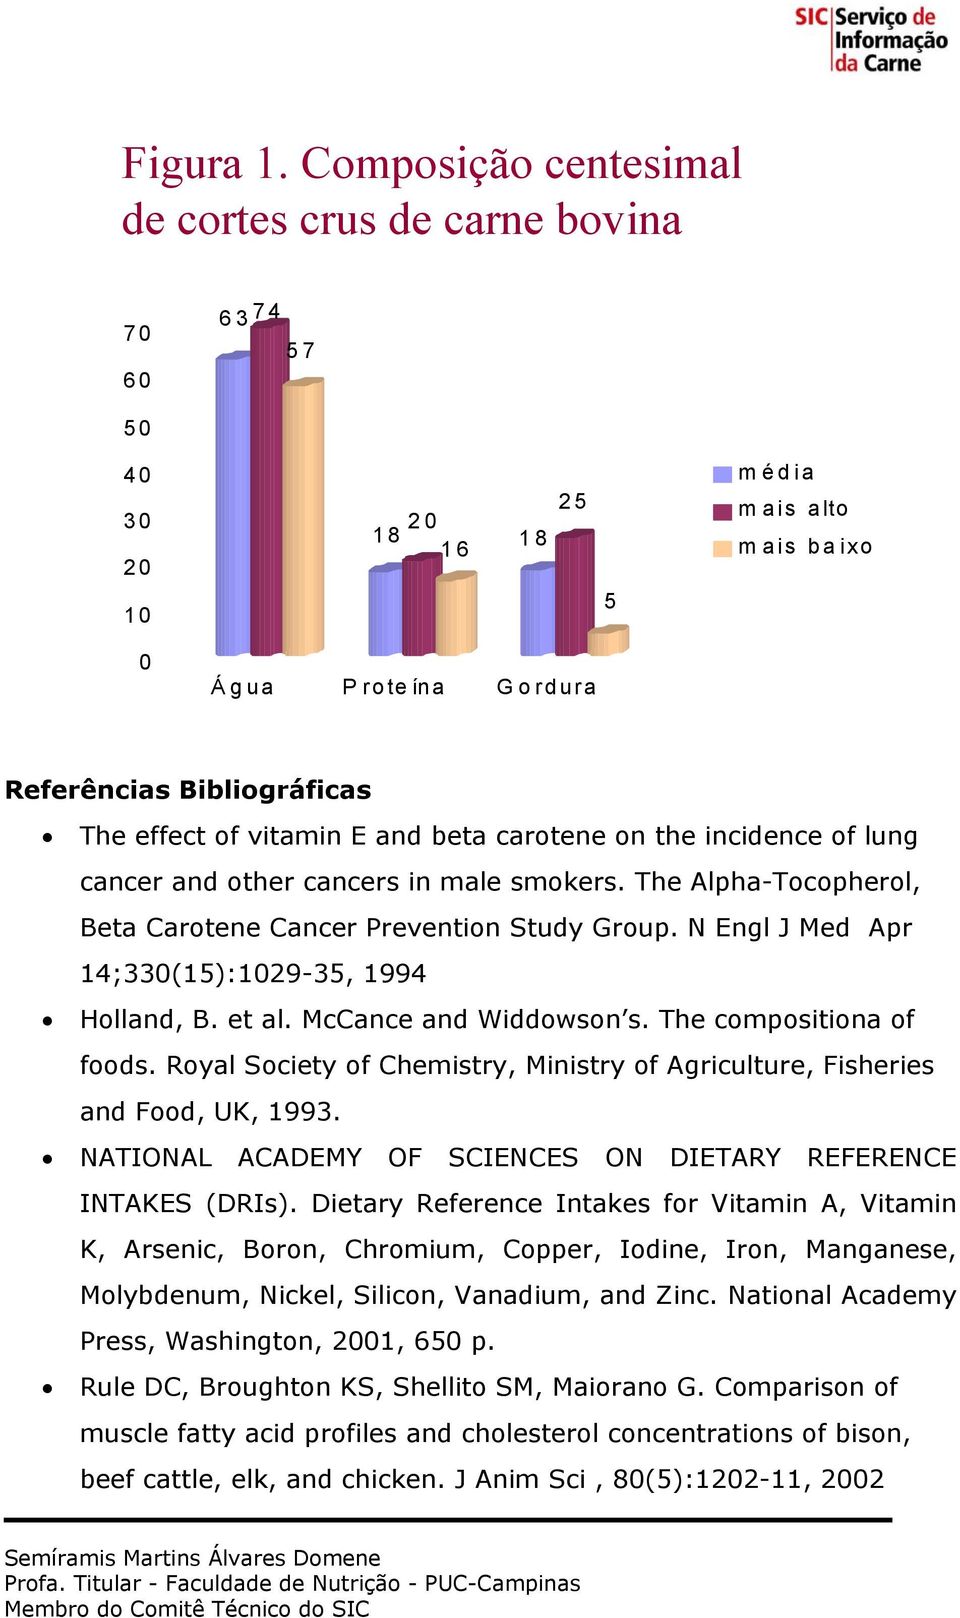 vitamin E and beta carotene on the incidence of lung cancer and other cancers in male smokers. The Alpha-Tocopherol, Beta Carotene Cancer Prevention Study Group.